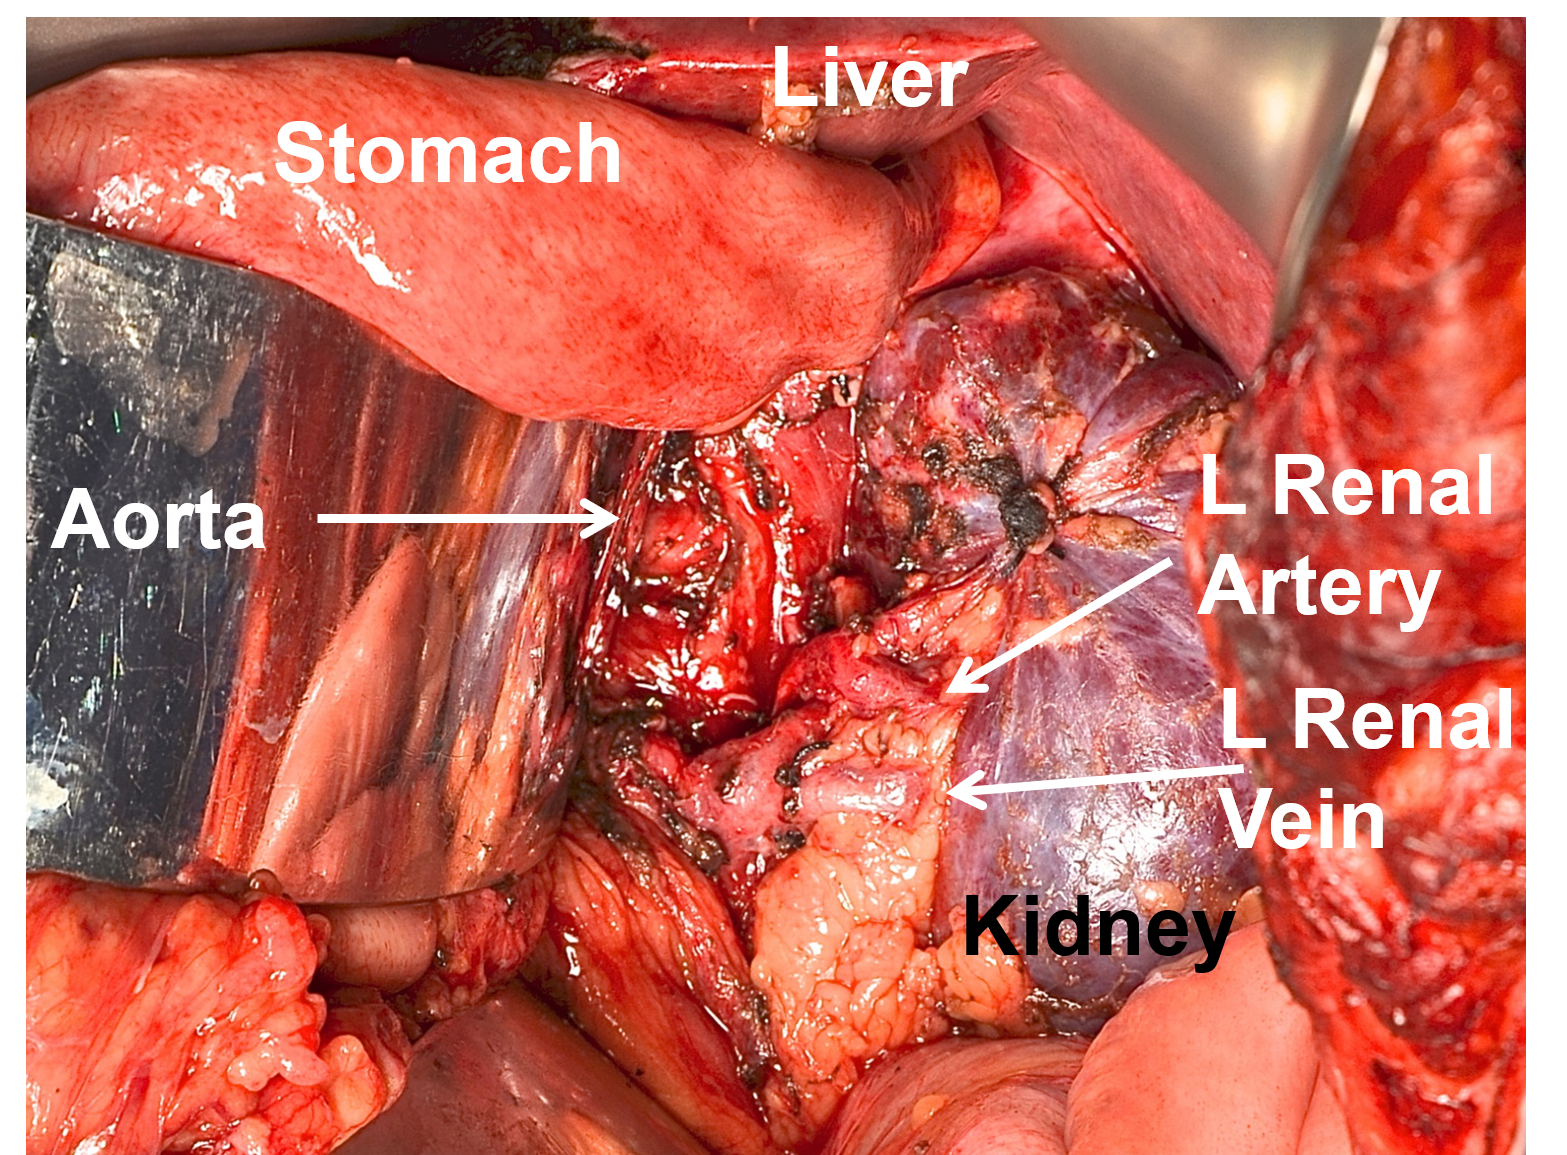 Completed resection after an open, old-fashioned reoperation for pheochromocytoma tumor spilled throughout the abdomen (called “pheochromocytomatosis”) at the initial operation 15 years prior at an outside institution.